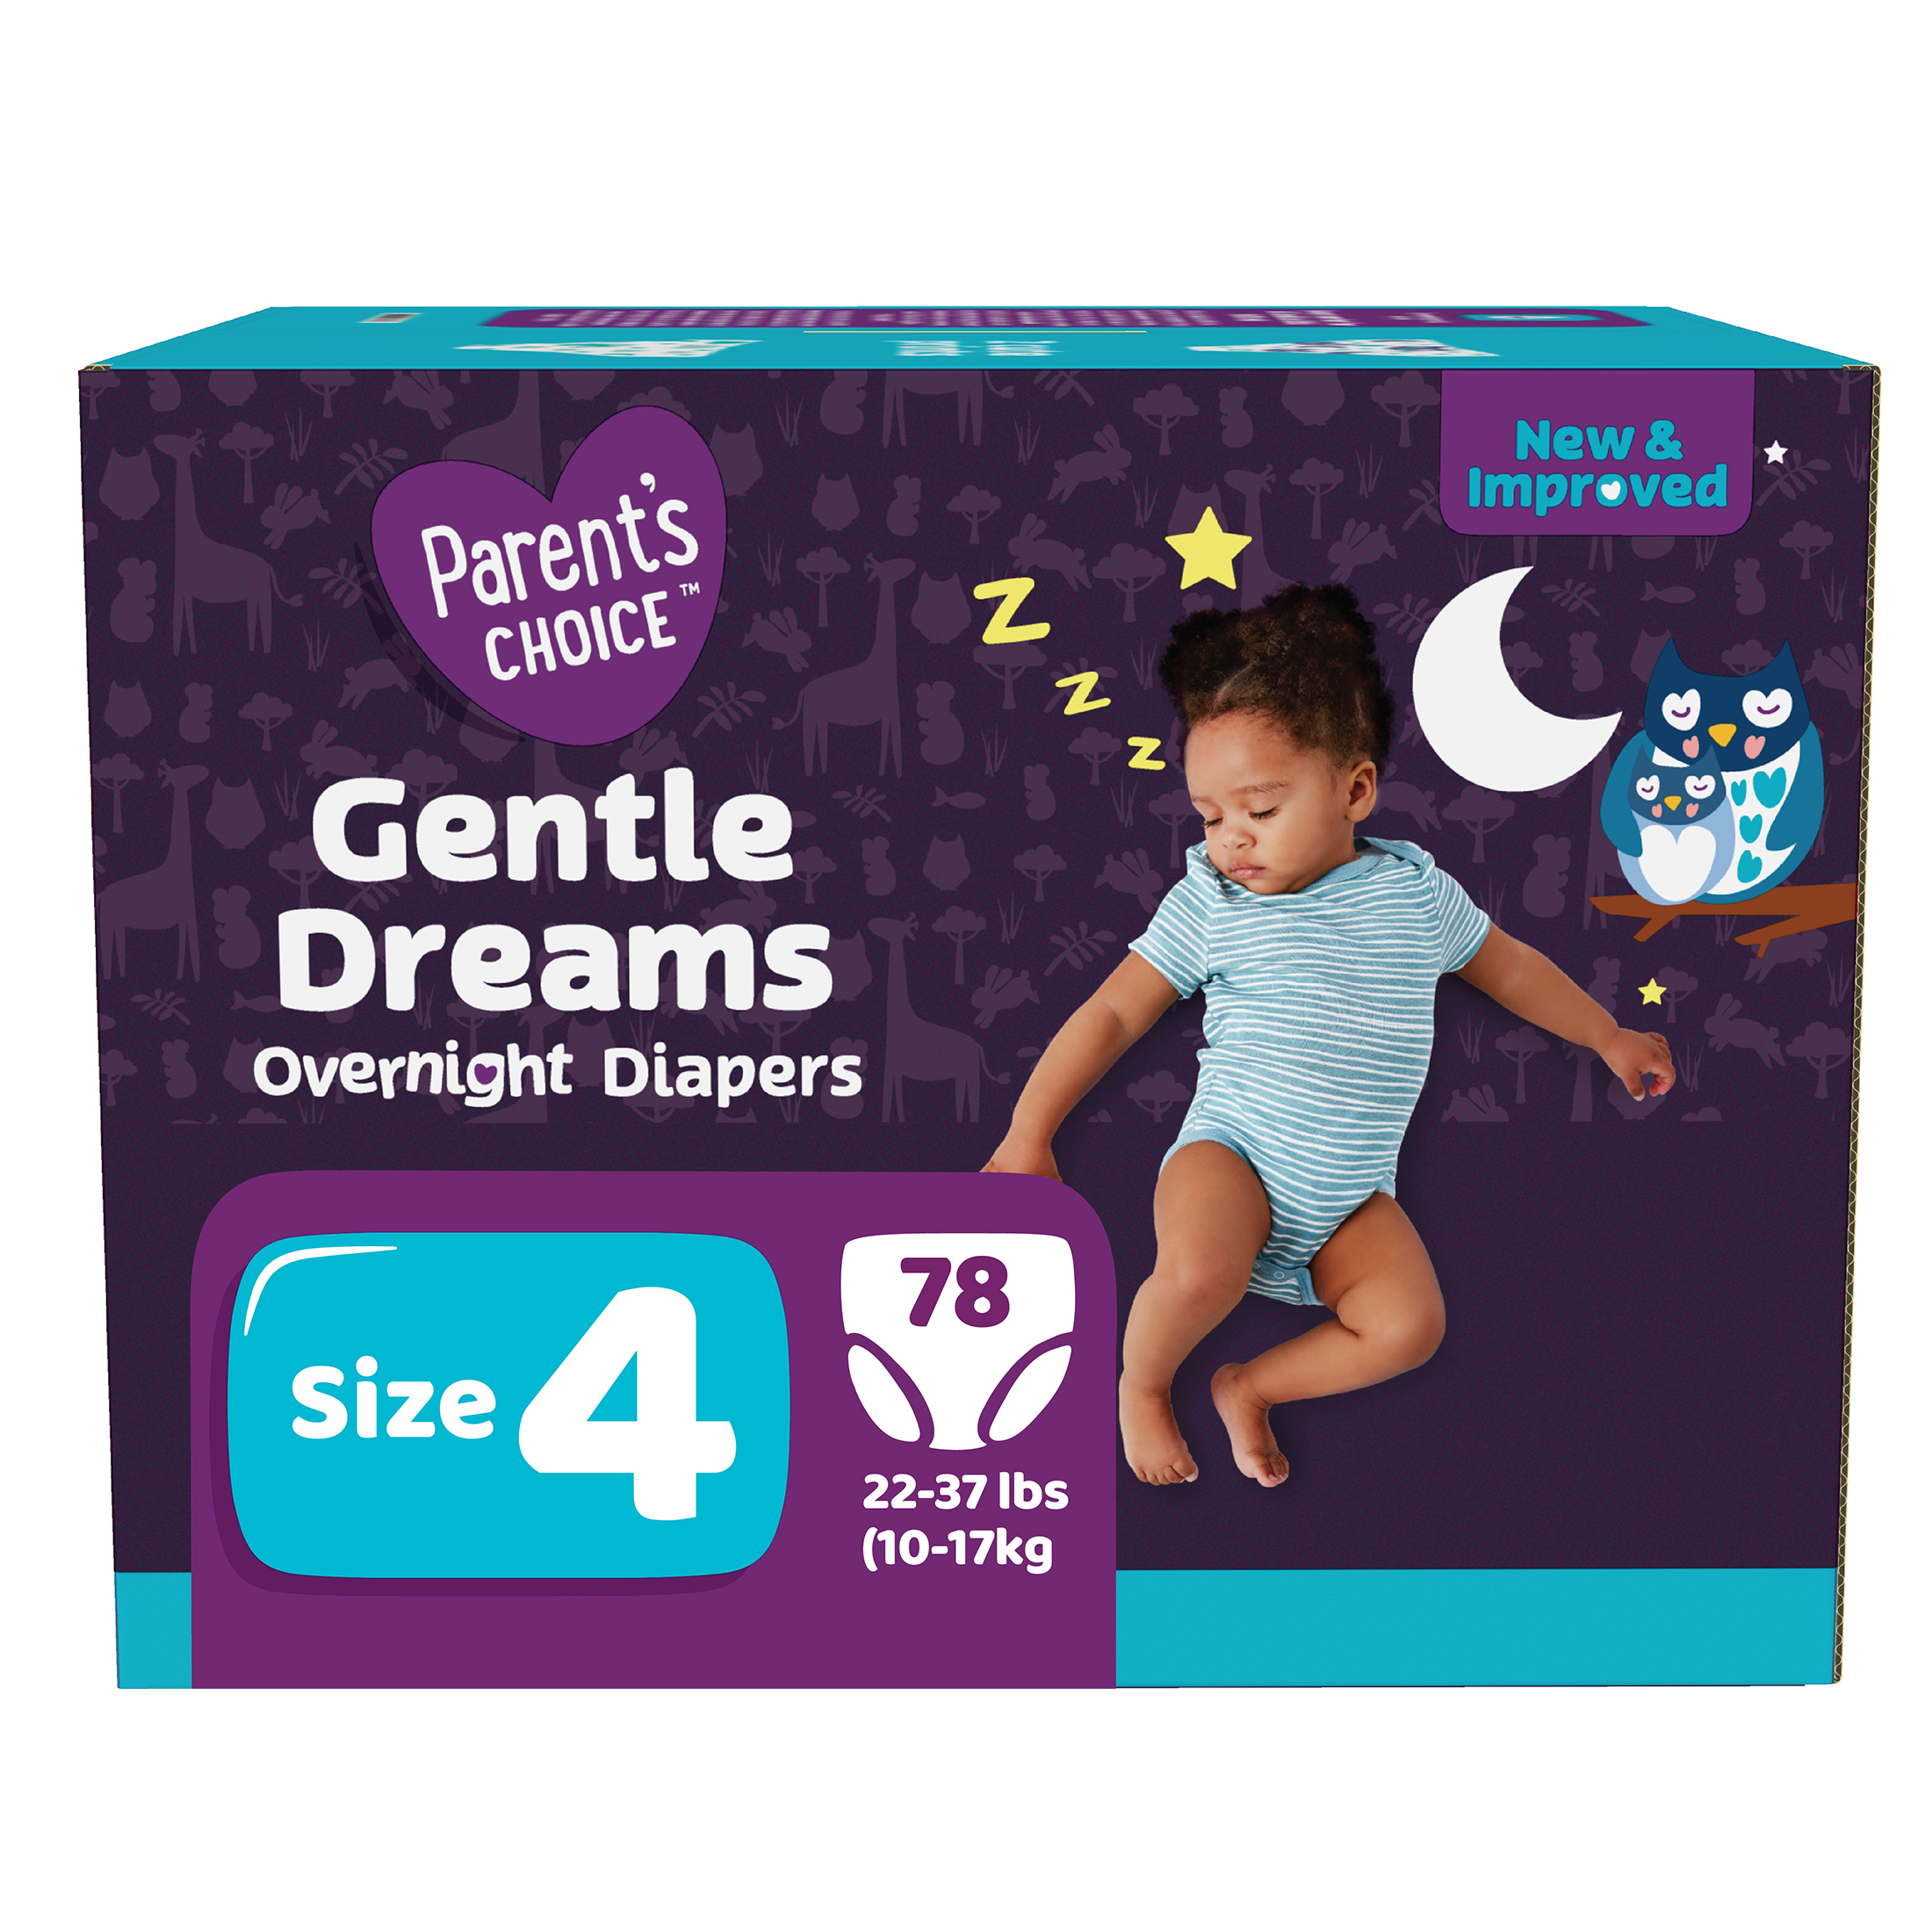 Parent's Choice Gentle Dreams Overnight Diapers, Size 4, 78 Count - image 4 of 10